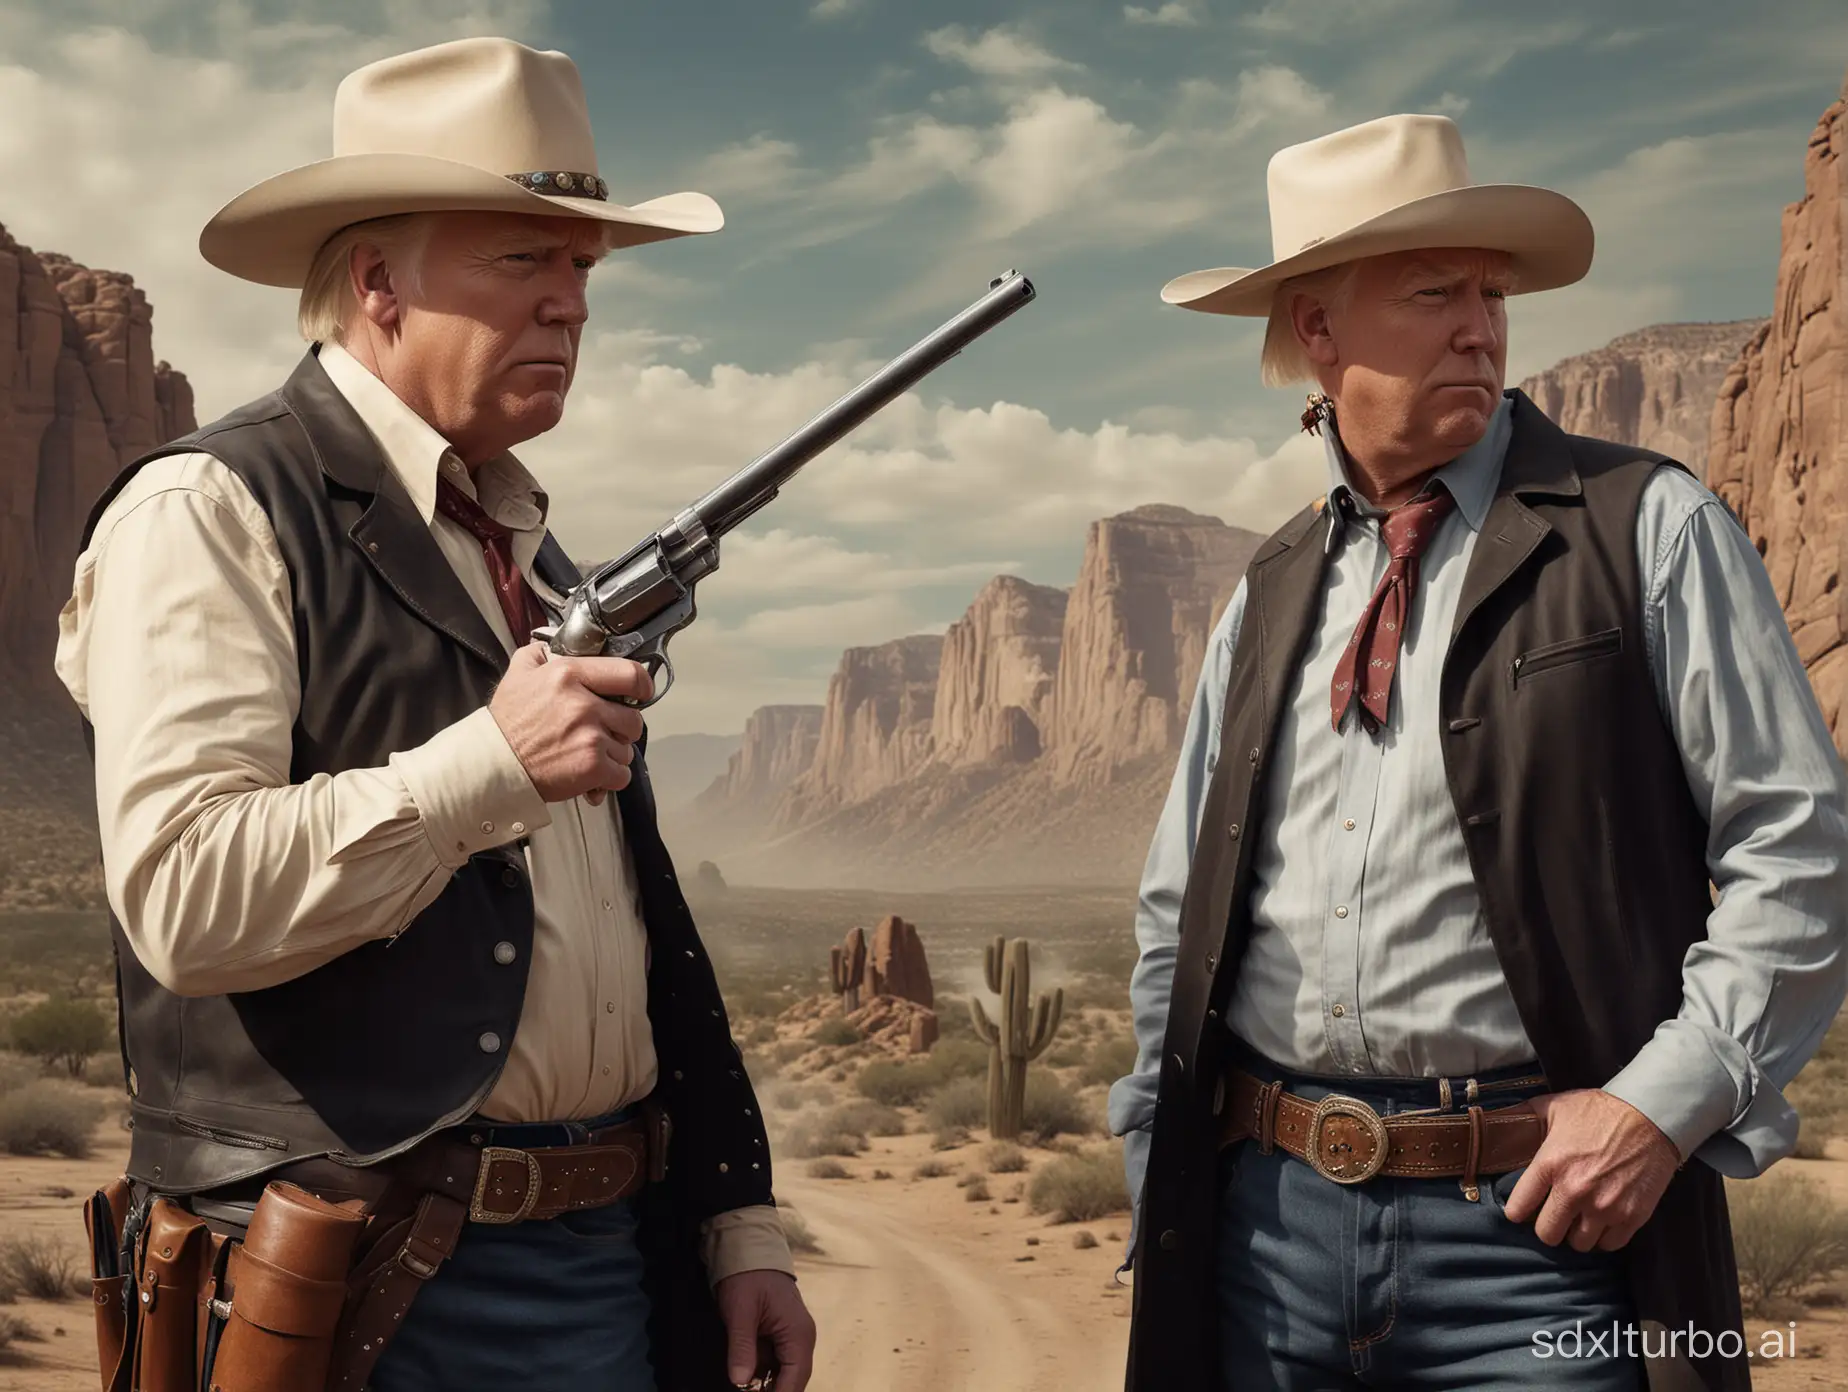 An extremely photo realistic cowboy western  image of Donald Trump and Joe Biden dressed as gun slingers about to face each other off in a Hollywood style gunfight duel.